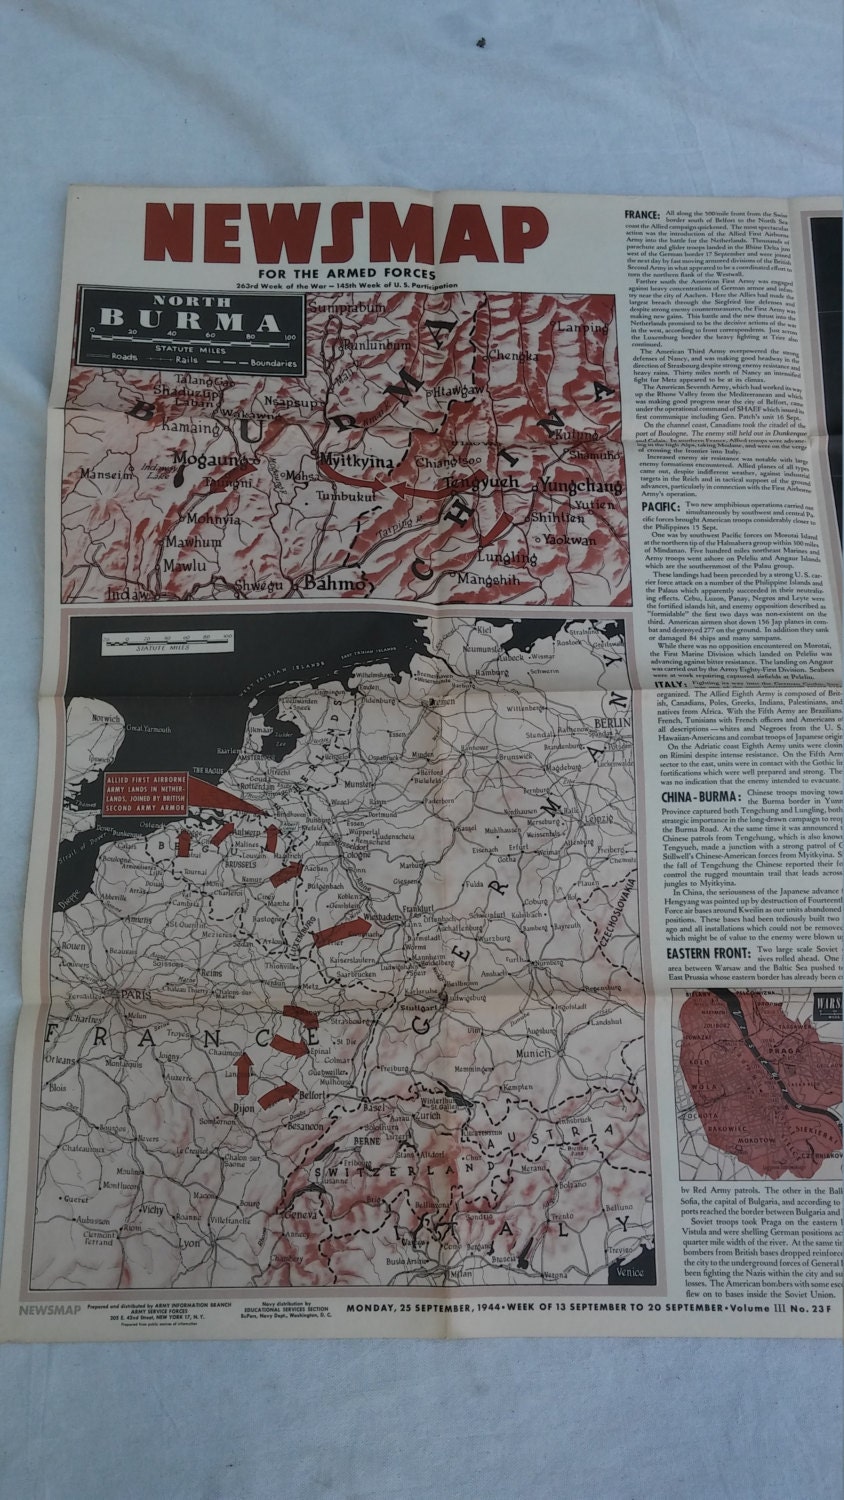 1944 Newsmap for the Armed Forces - Etsy